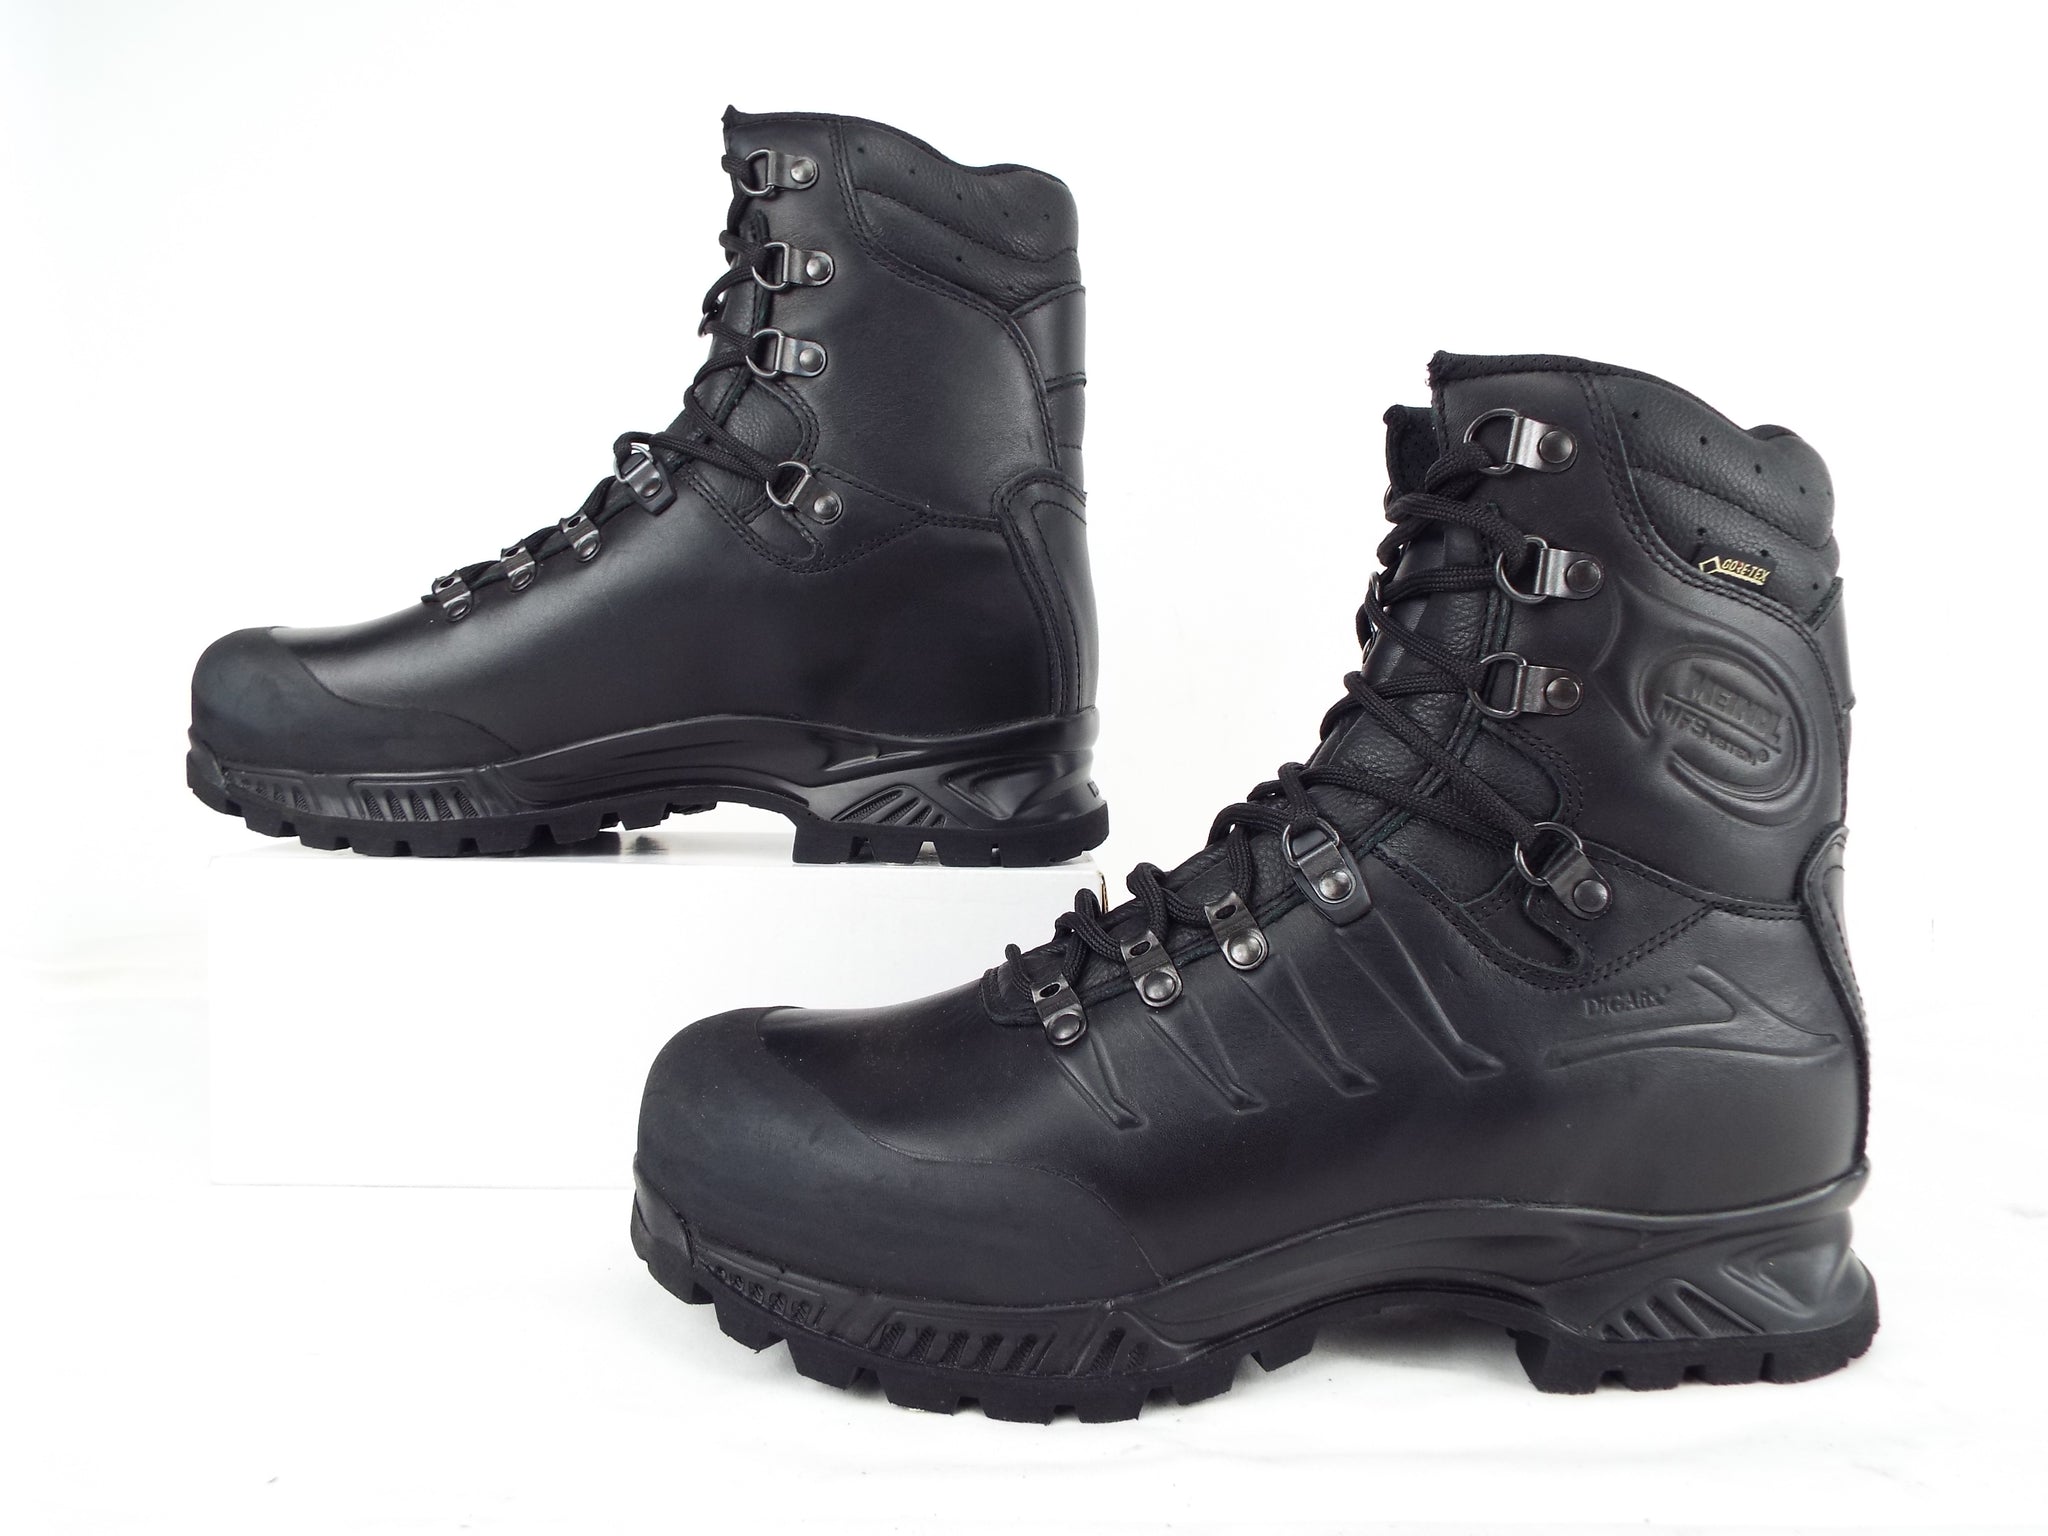 Dutch Army Combat Boots - Meindl brand - Gore-Tex - Forces Uniform and Kit